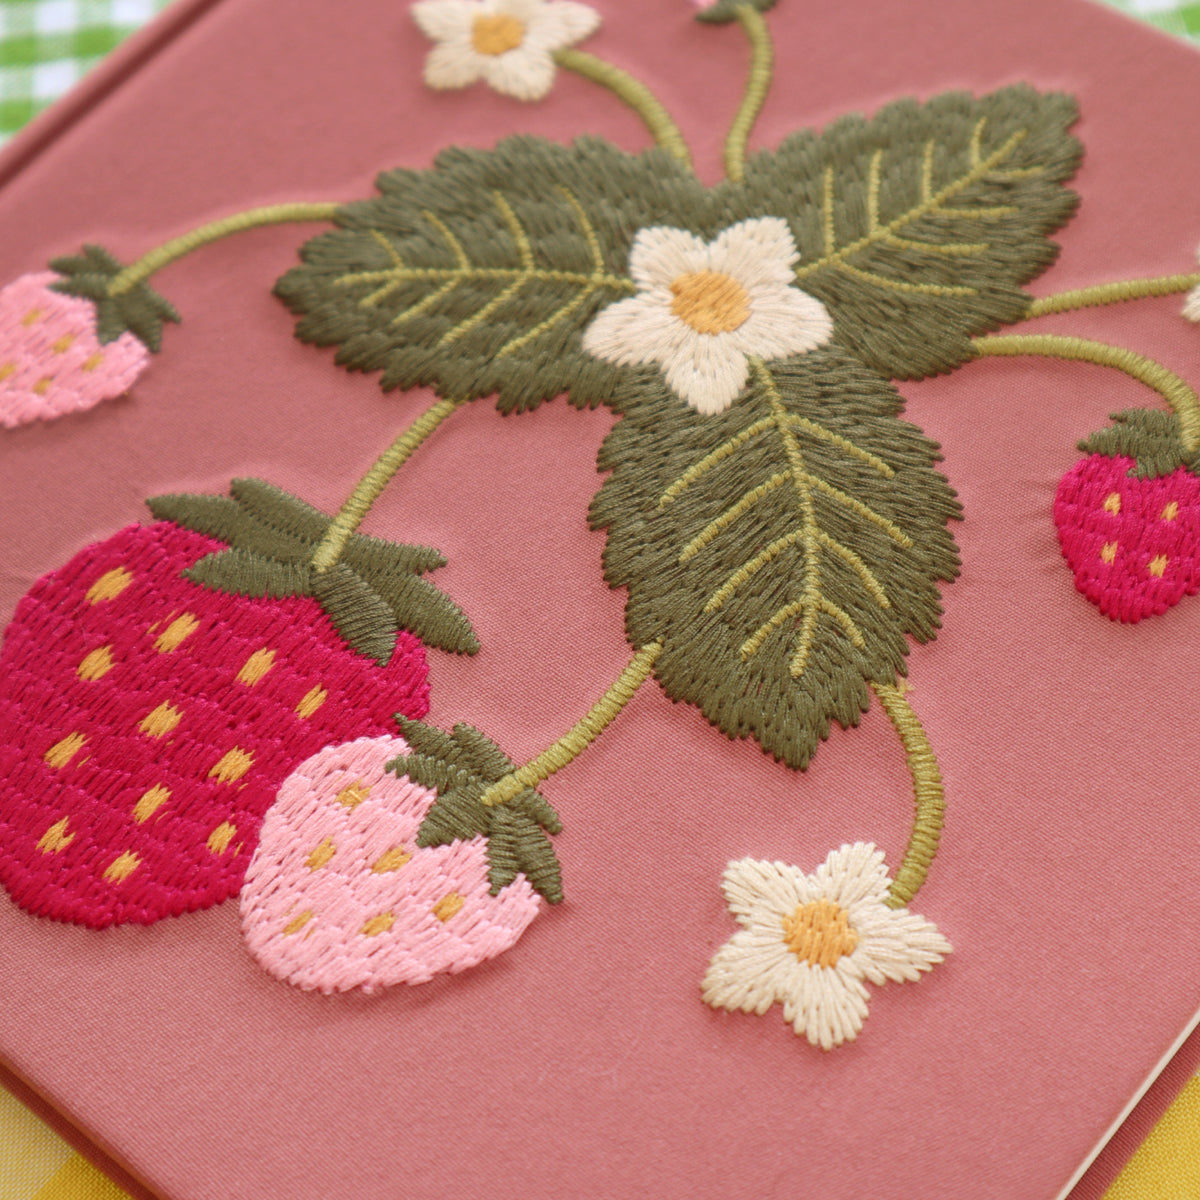 &quot;Strawberry&quot; Embroidered Sketchbook